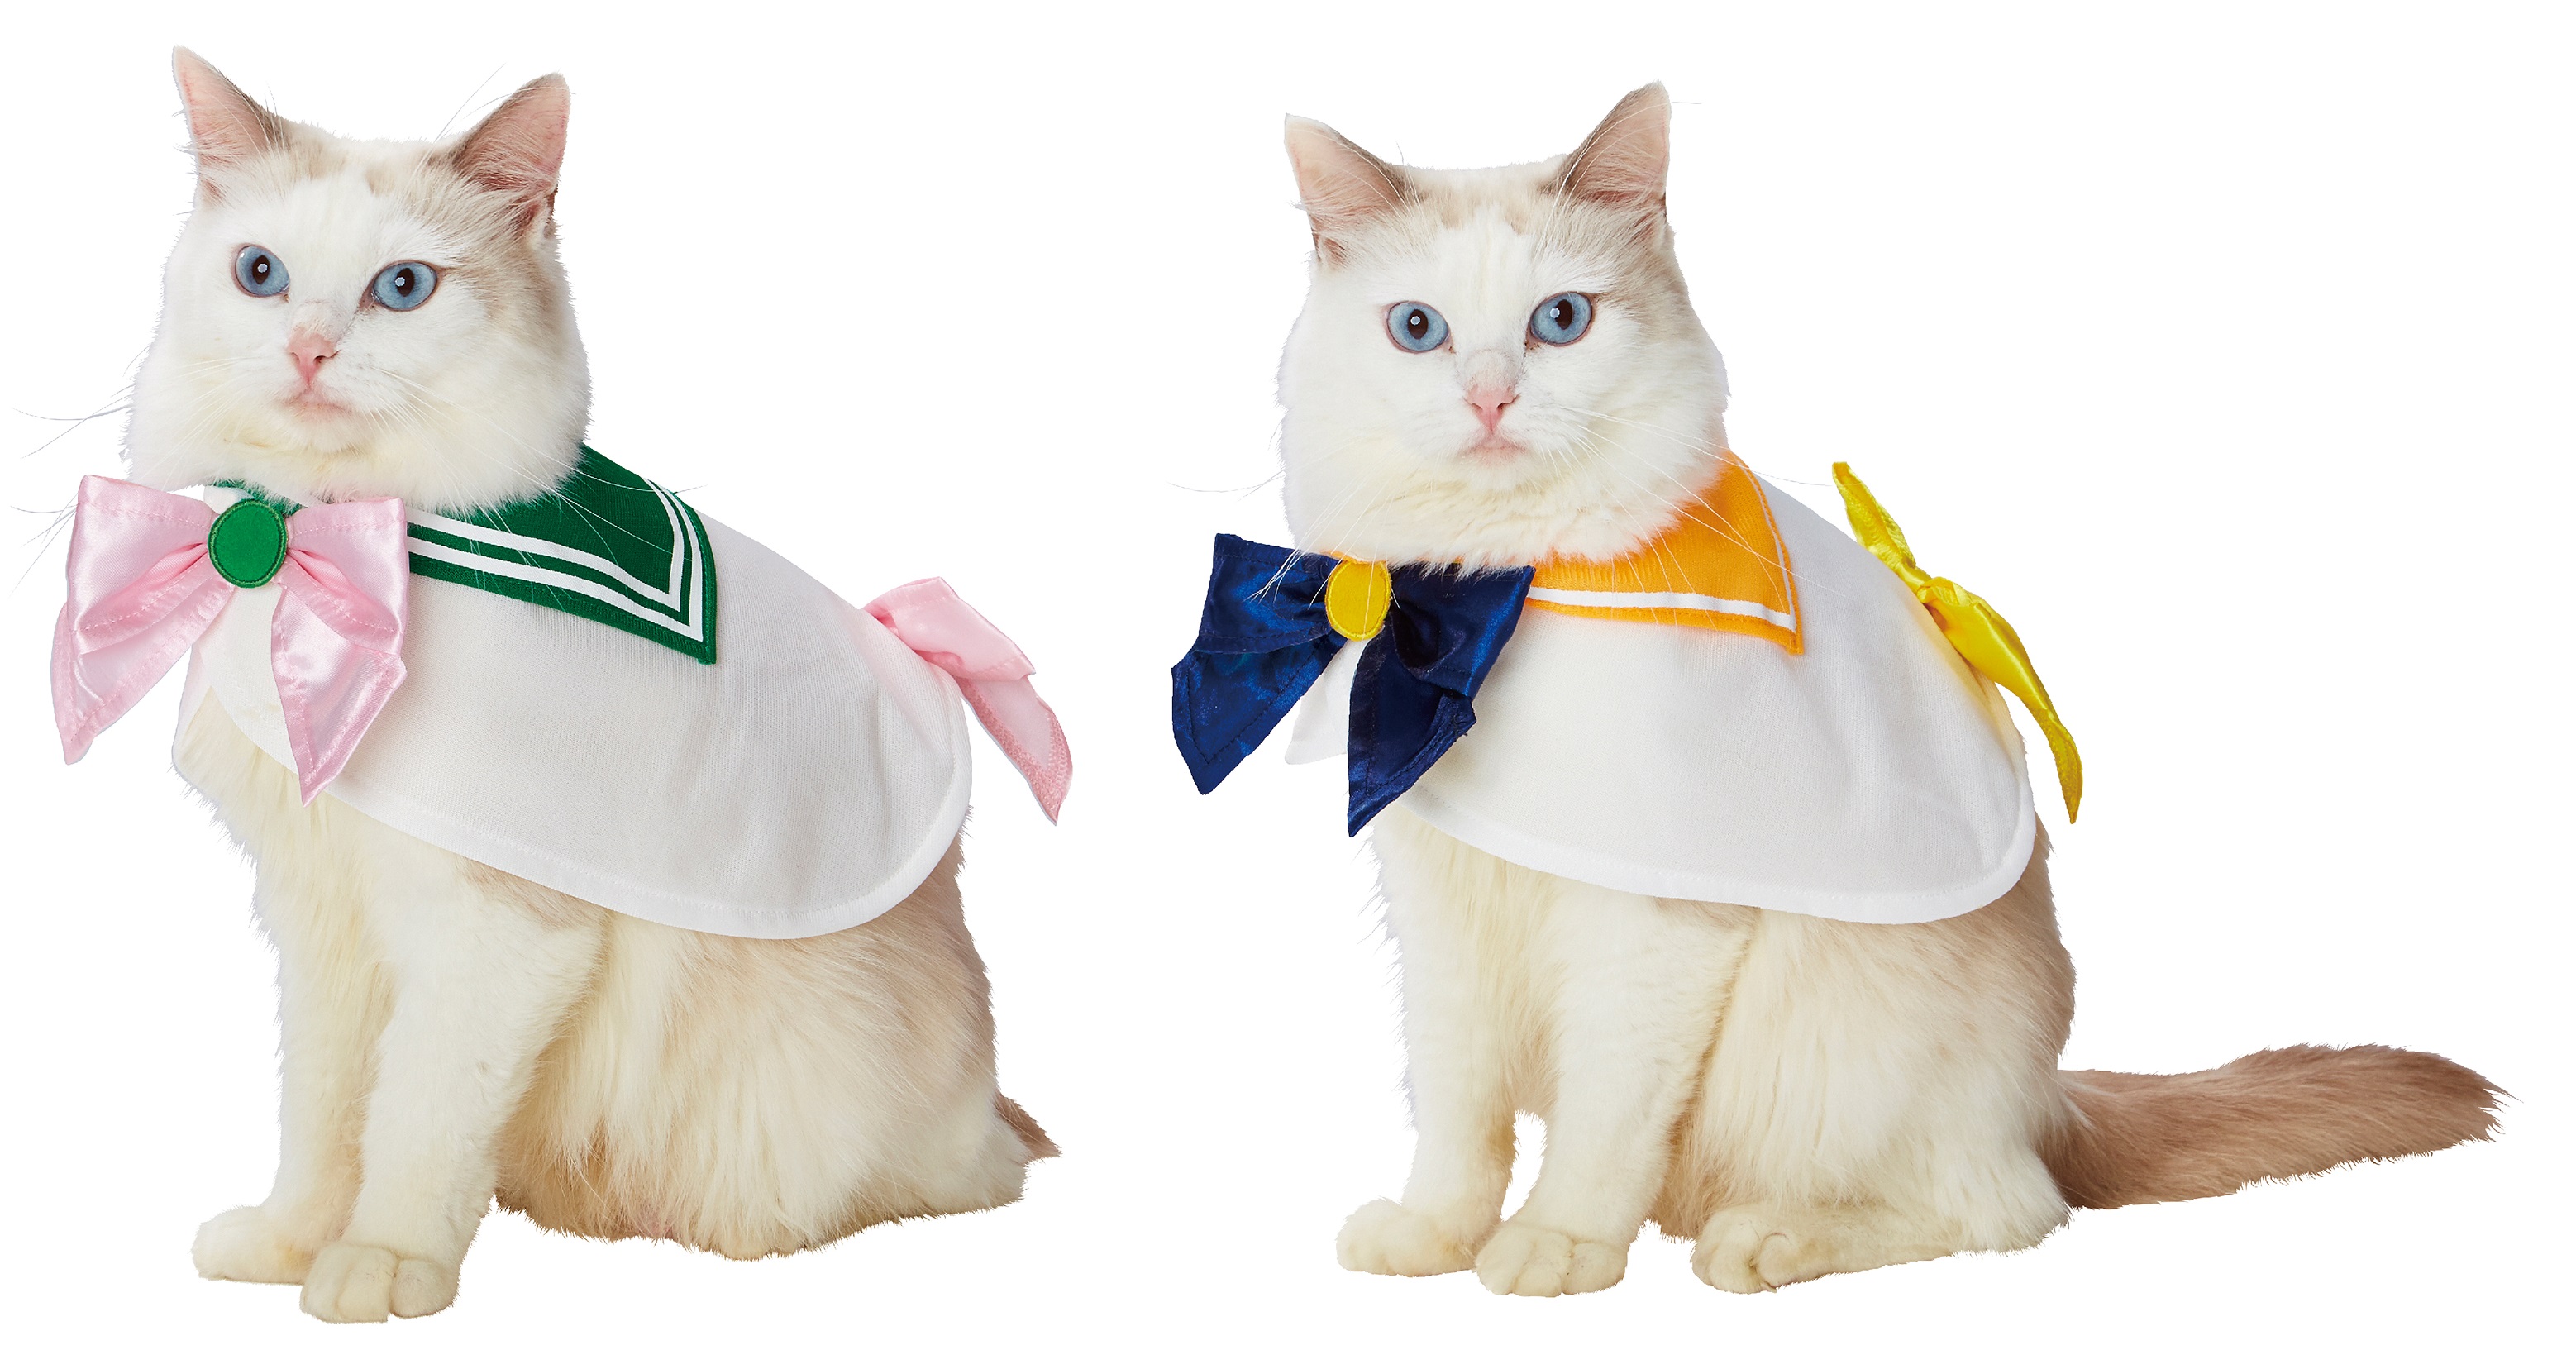 Talented Japanese Man Creates Anime Costumes For His Cats